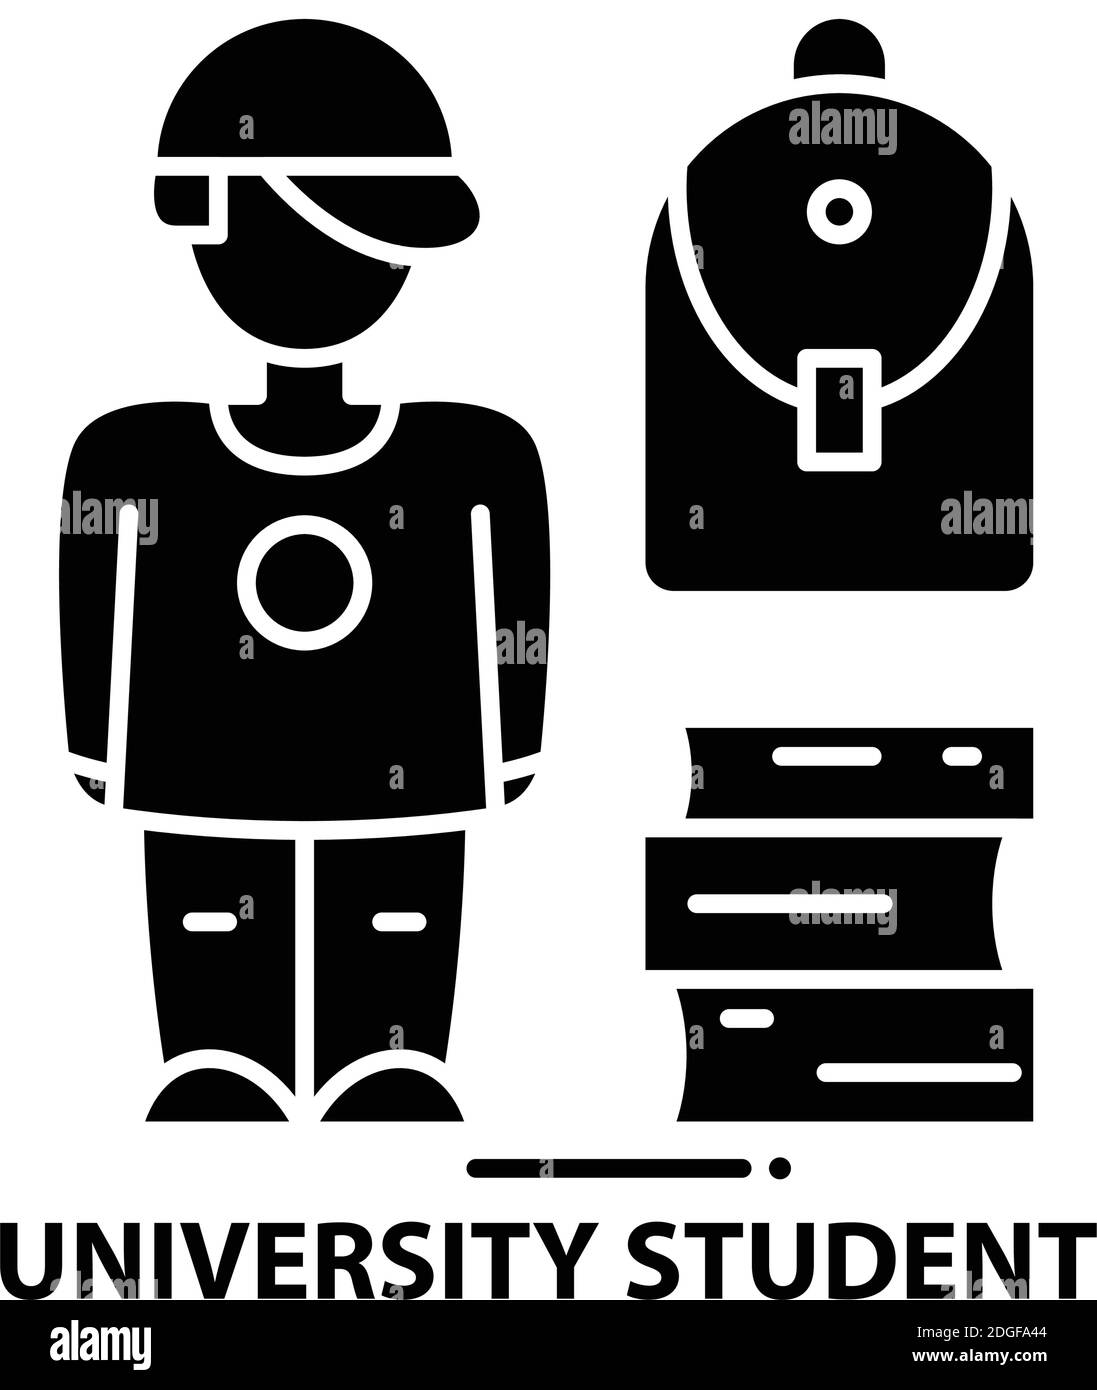 university student icon, black vector sign with editable strokes, concept illustration Stock Vector